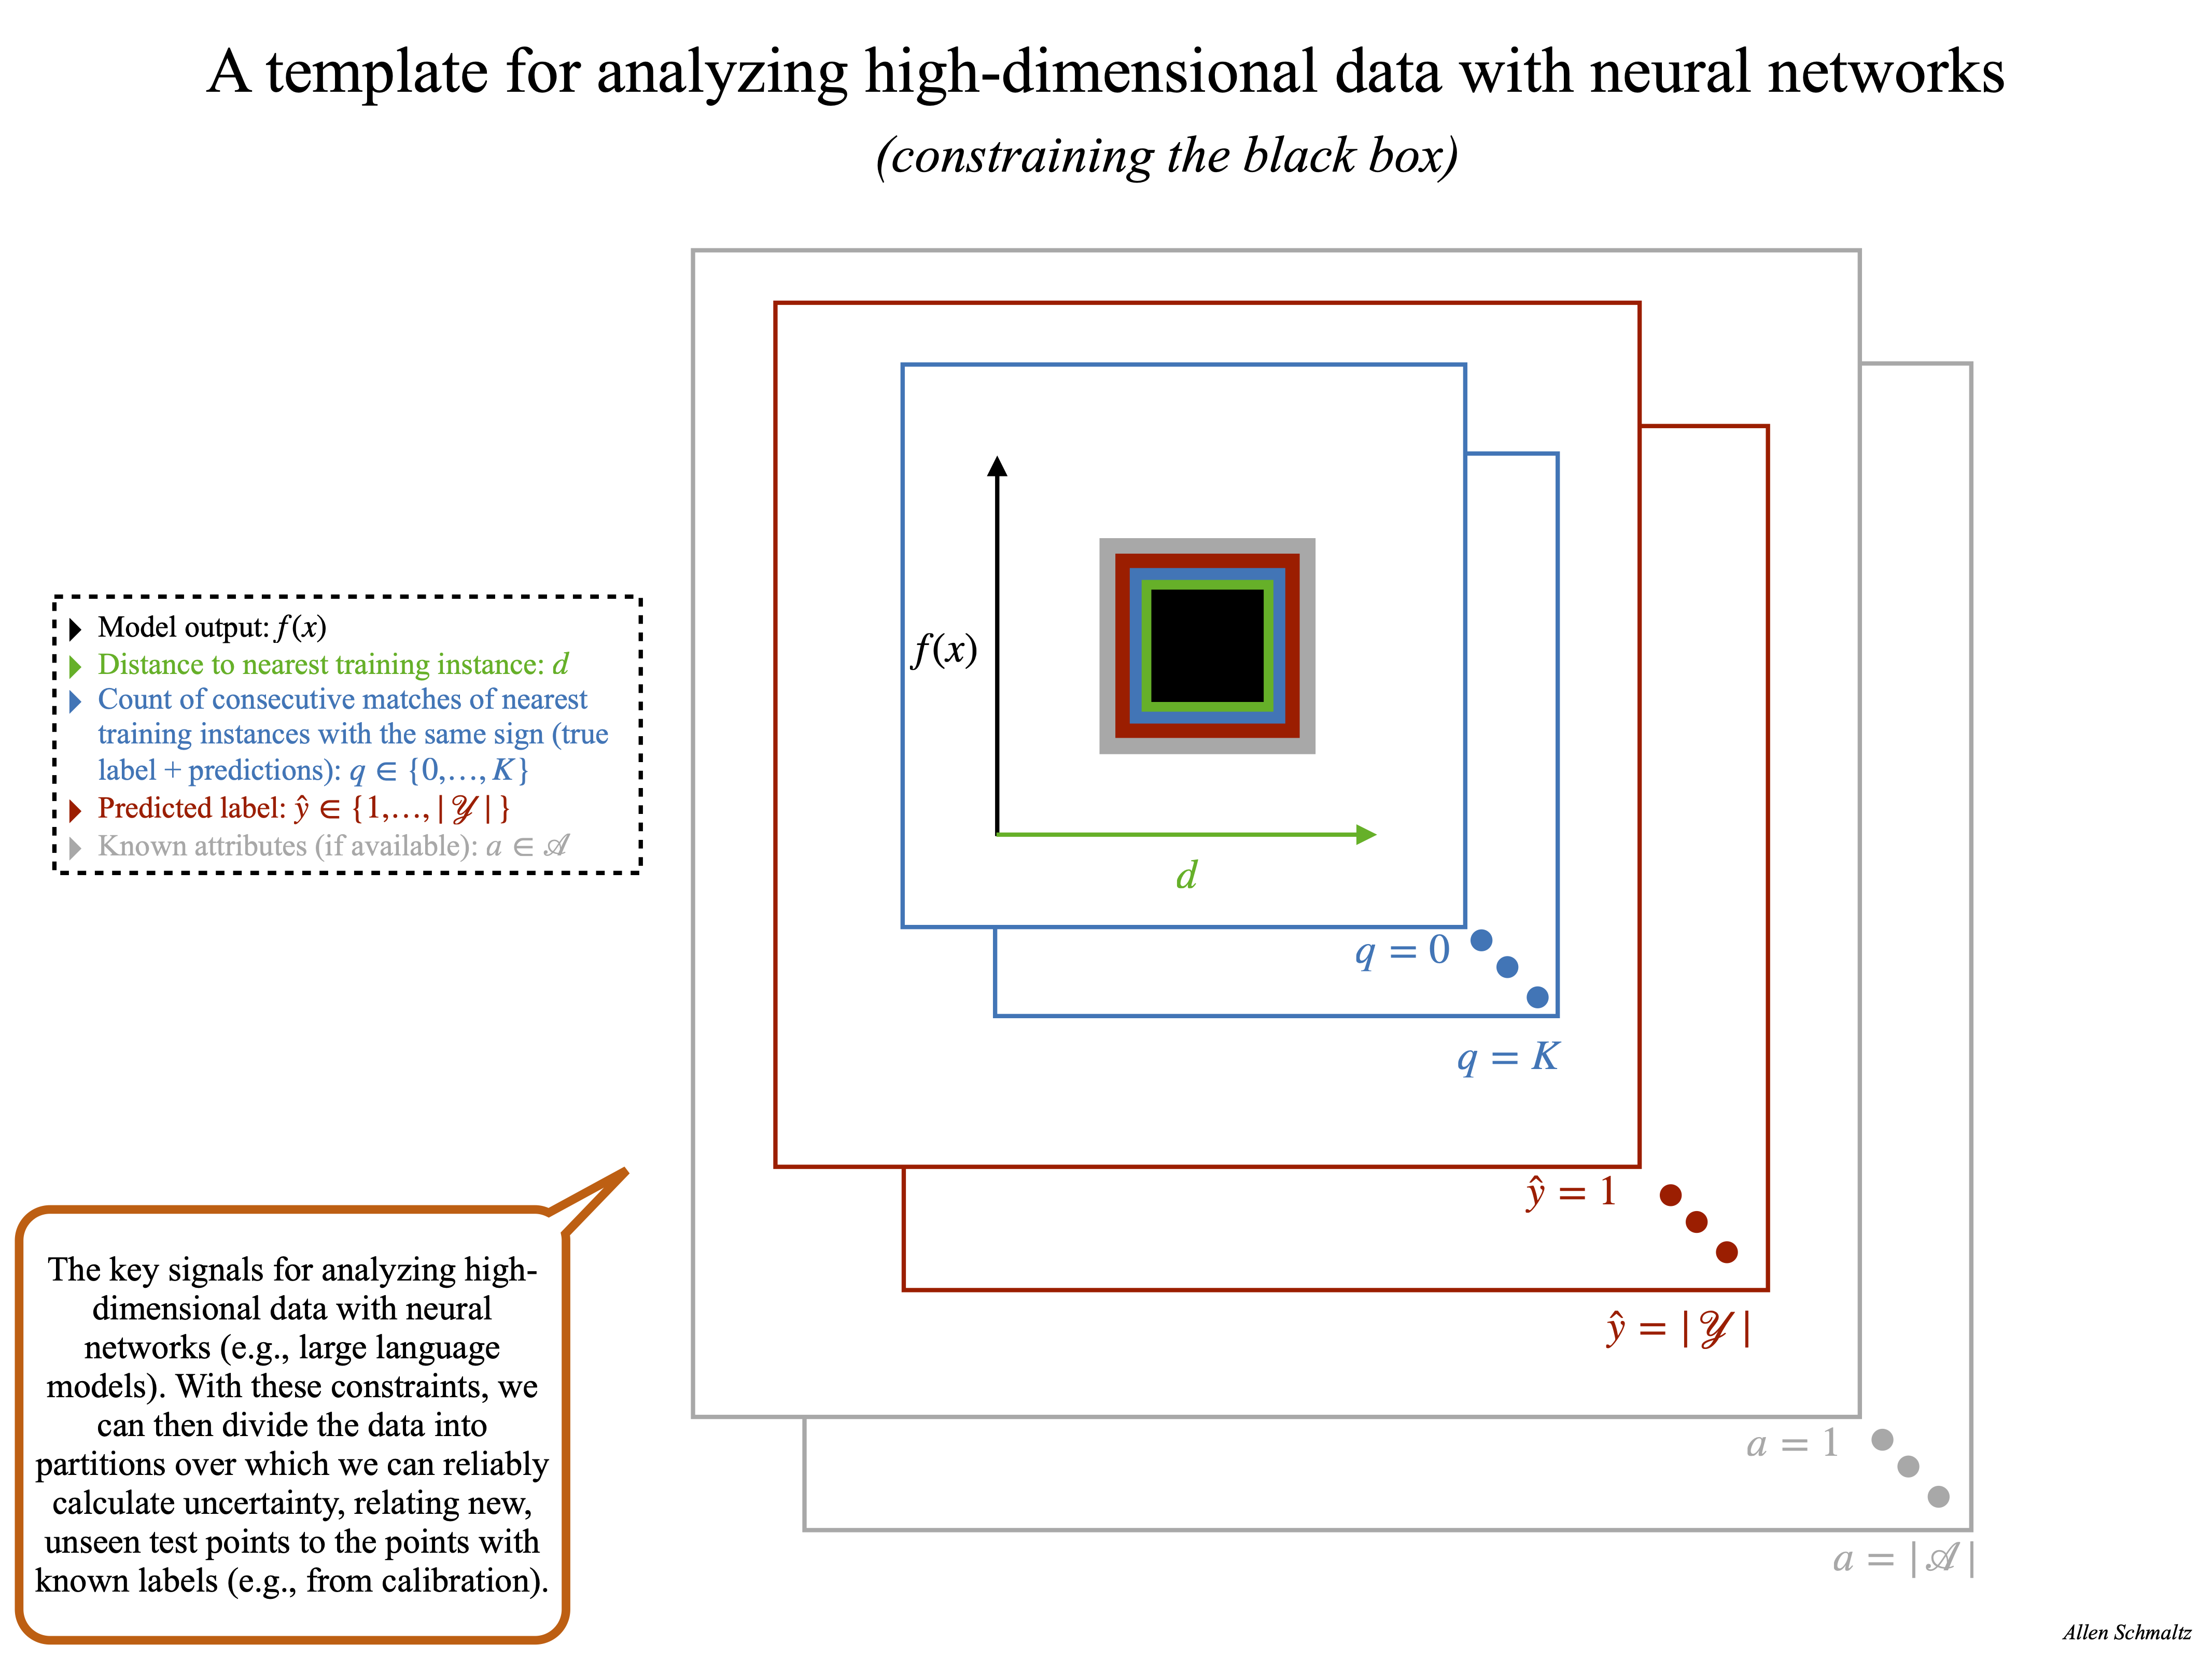 A Template for High-dimensional Data Analysis